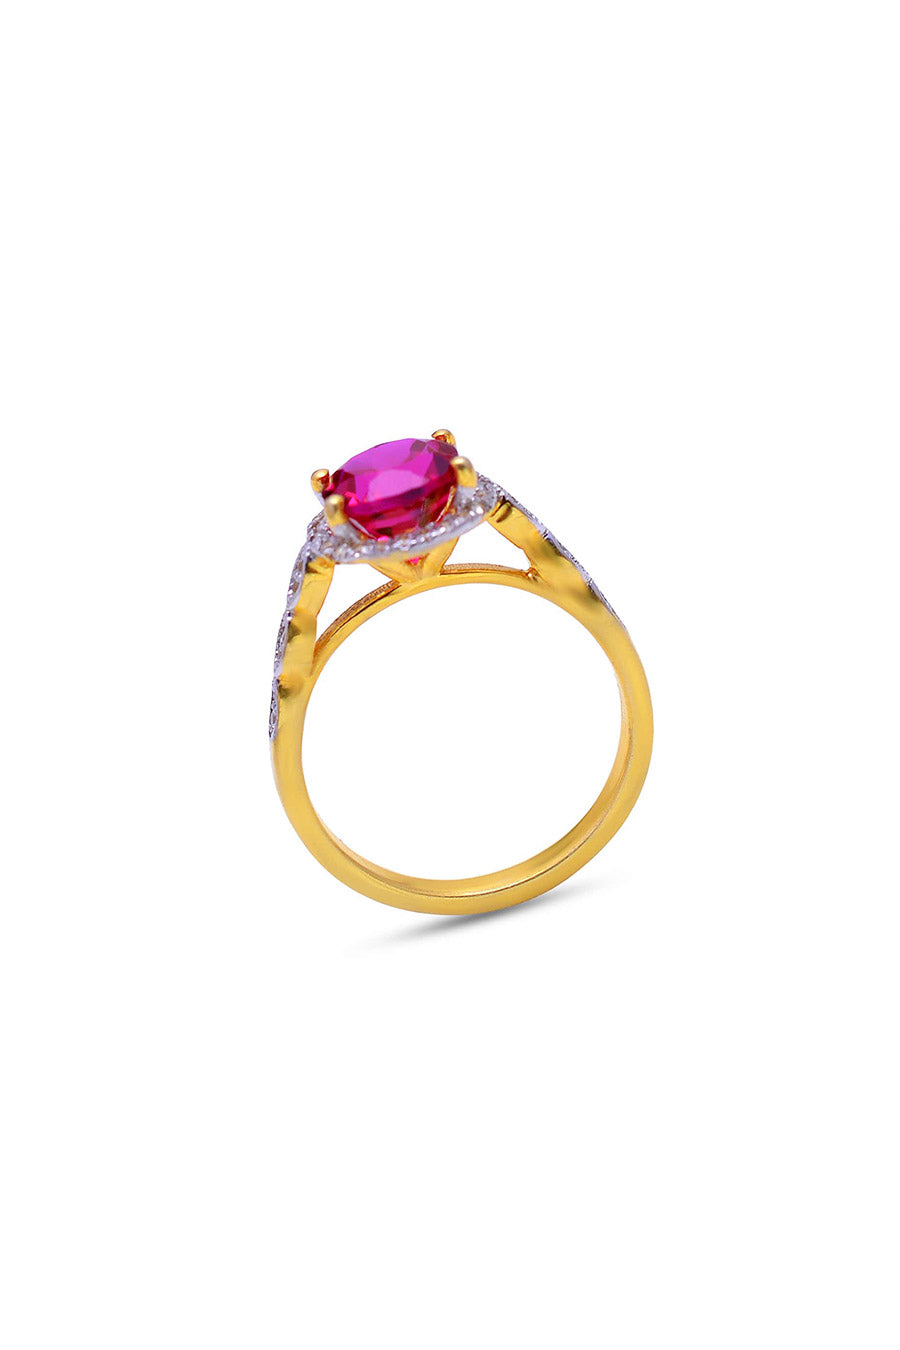 Genuine Ruby Halo Studded Ring in 925 Silver